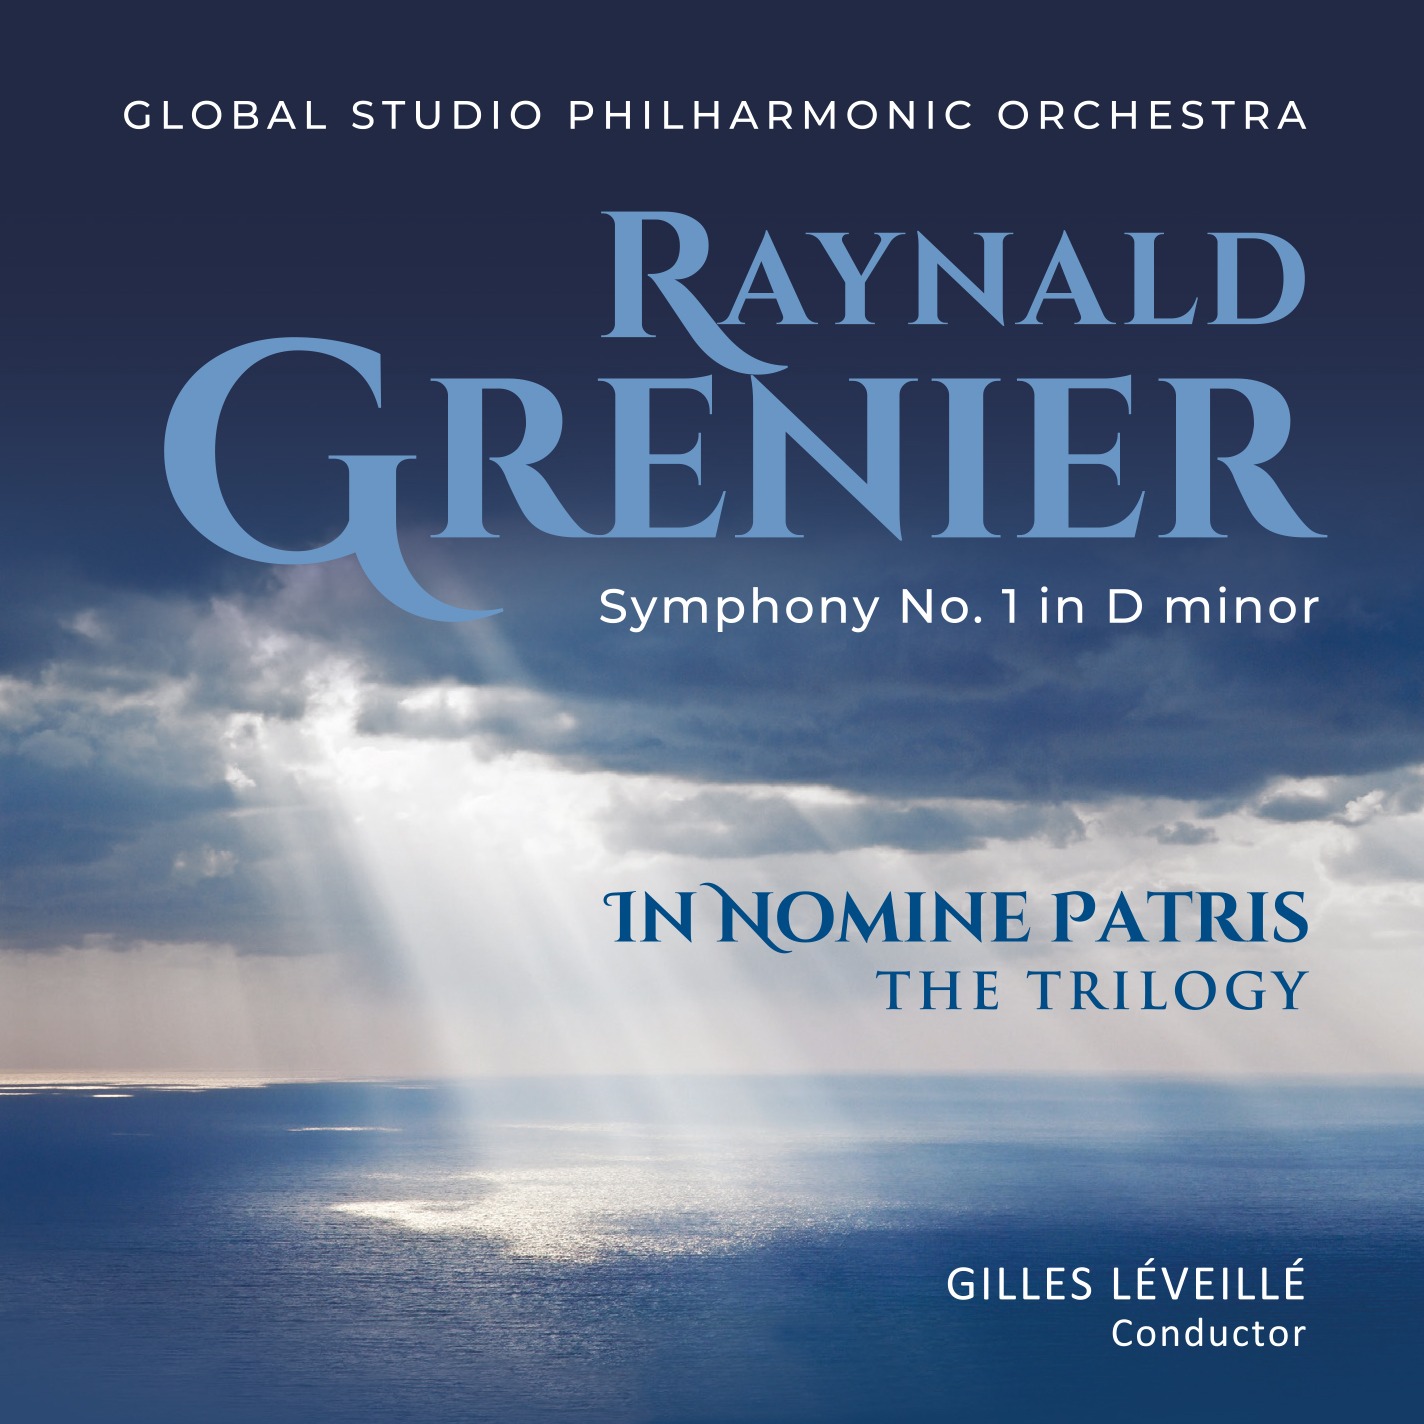 Sublime Symphonies that Inspire Awe and Wonder: Raynald Grenier Presents a Soulful New Album